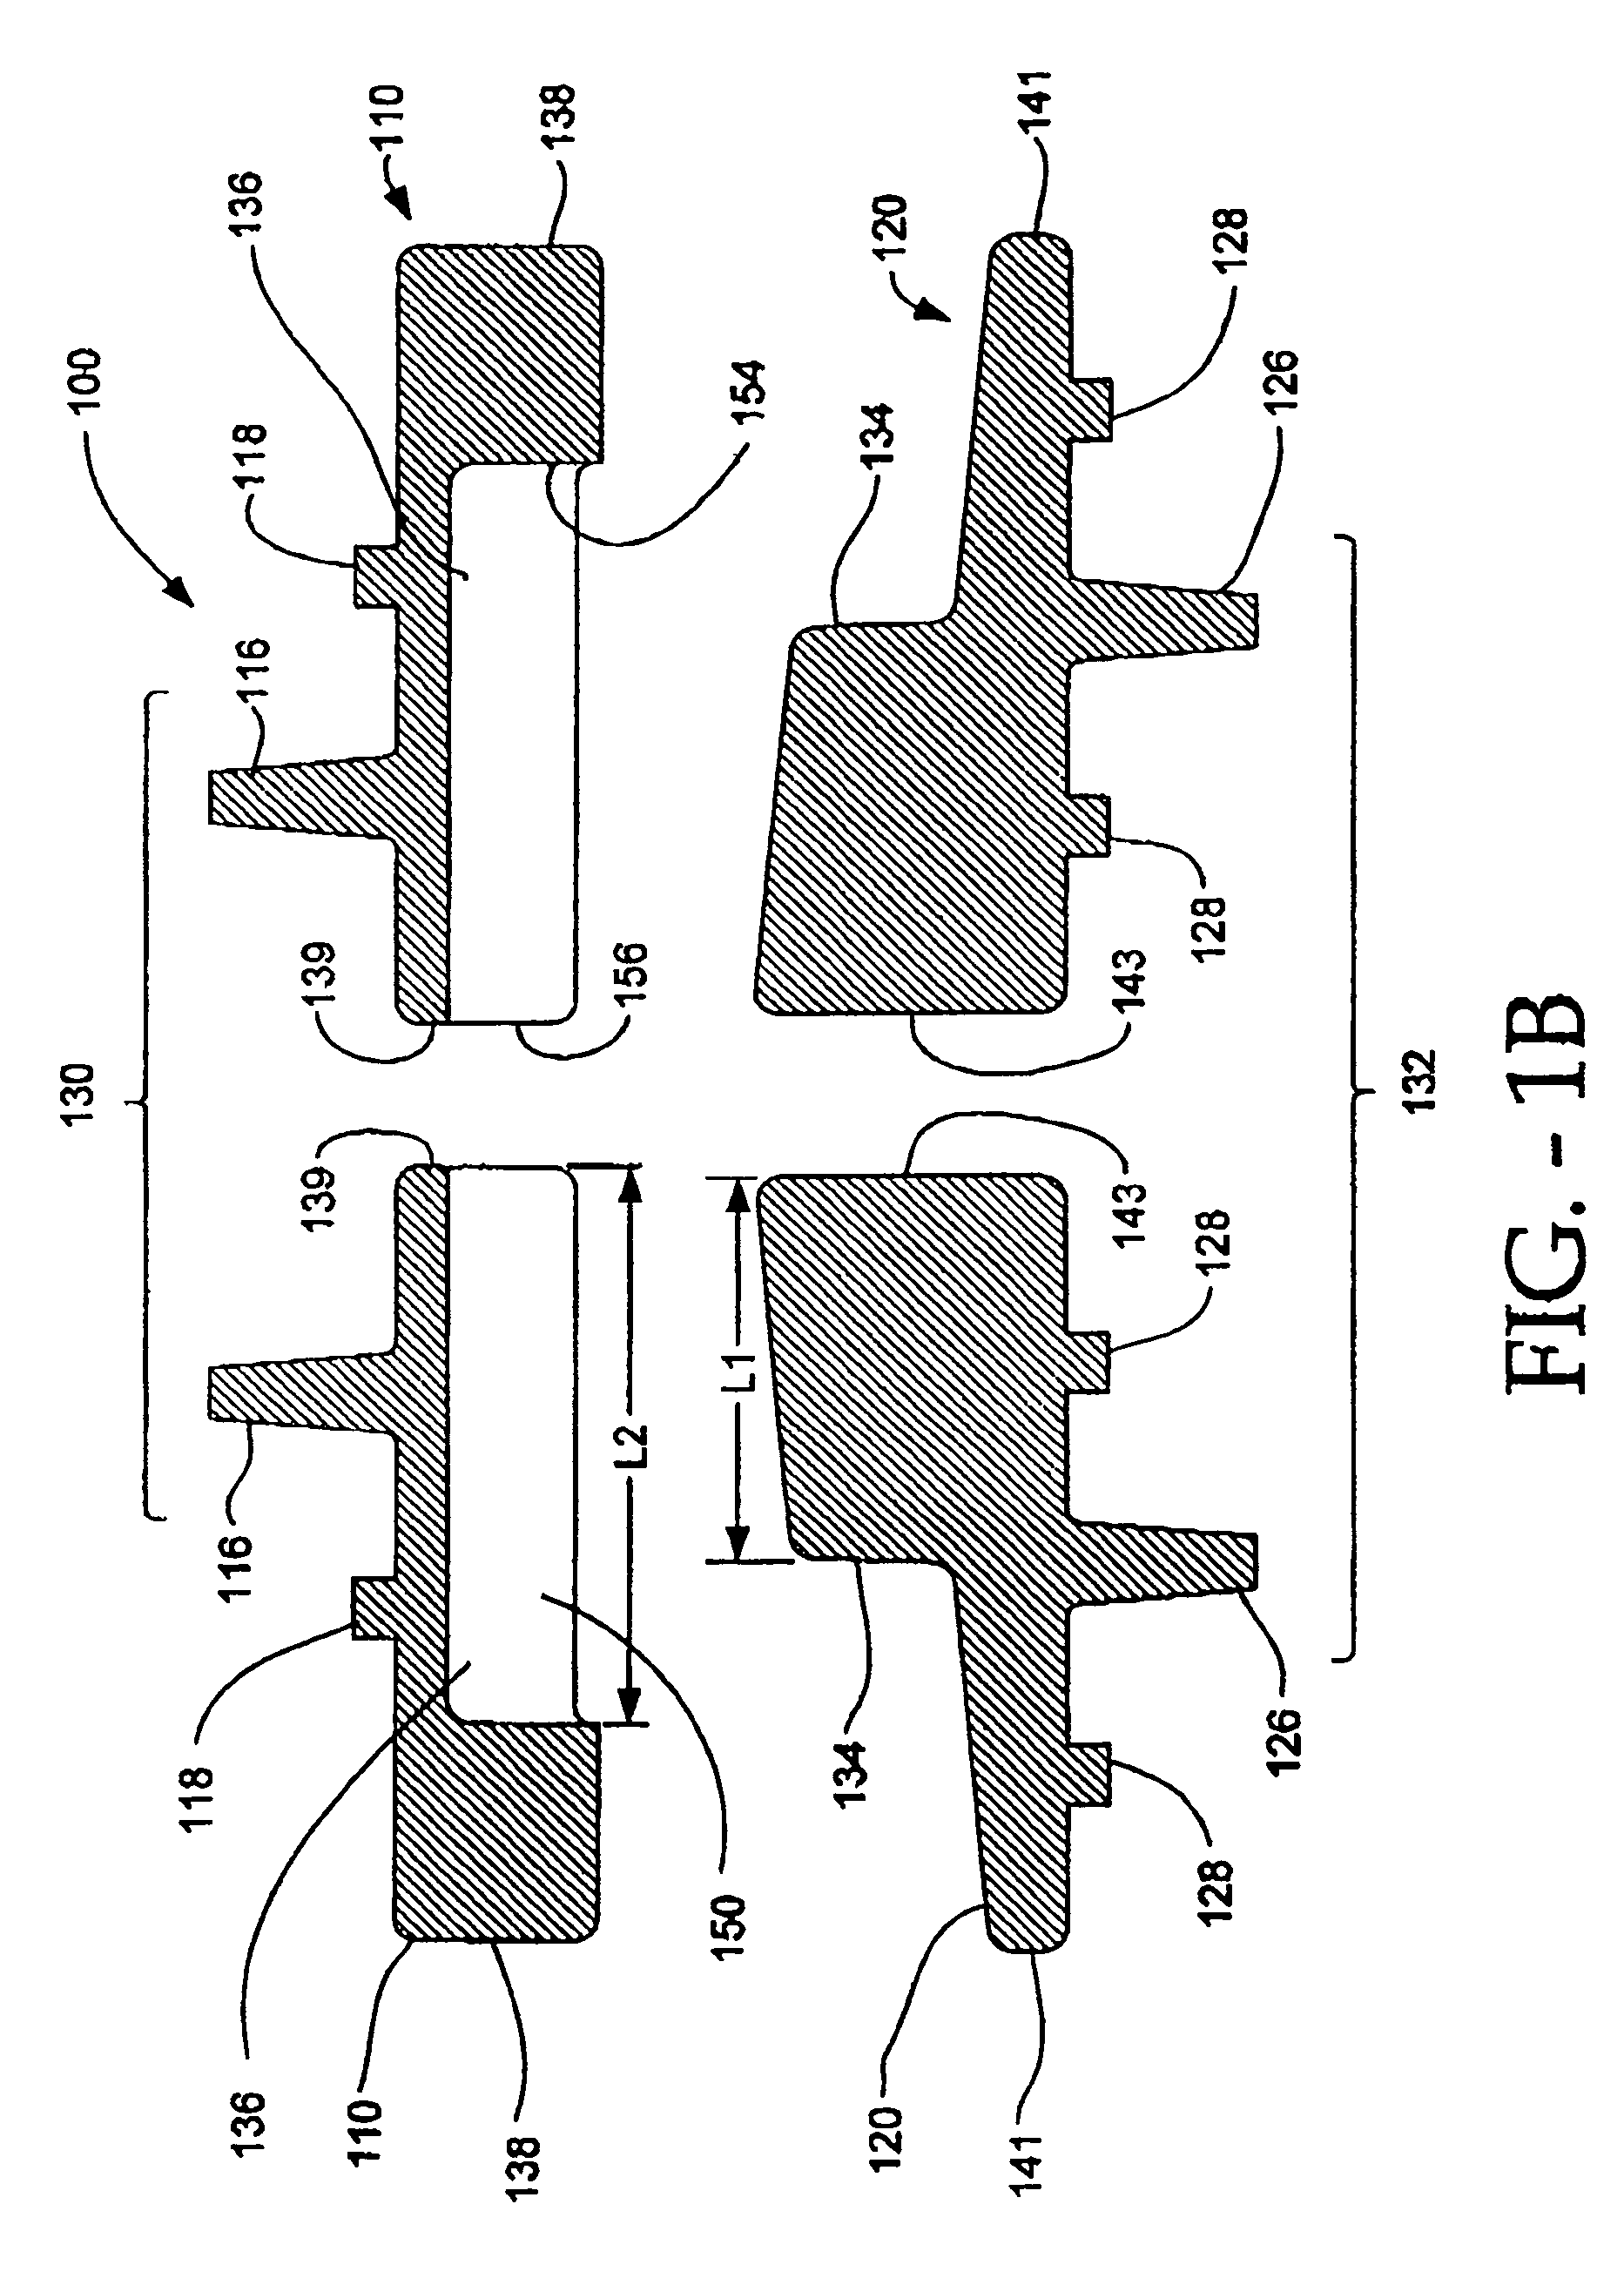 Artificial vertebral disk replacement implant with translating pivot point